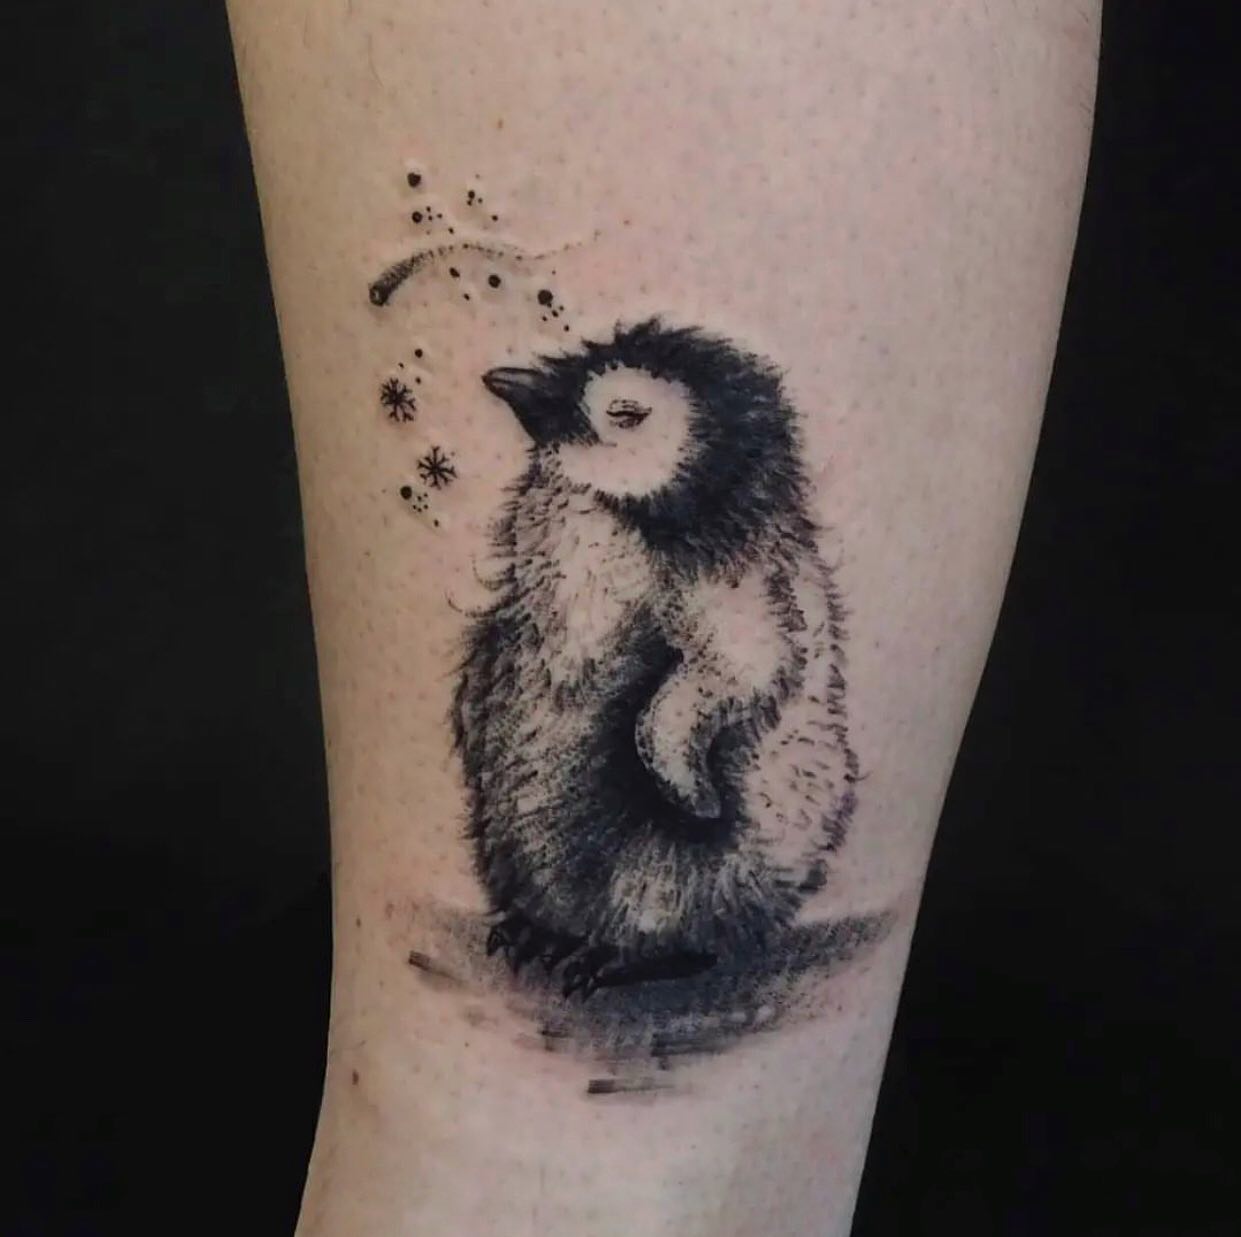 There are just a few things that are absolutely cute in this world. One of them is definitely baby penguin. Go for it if you are looking for a cute tattoo.